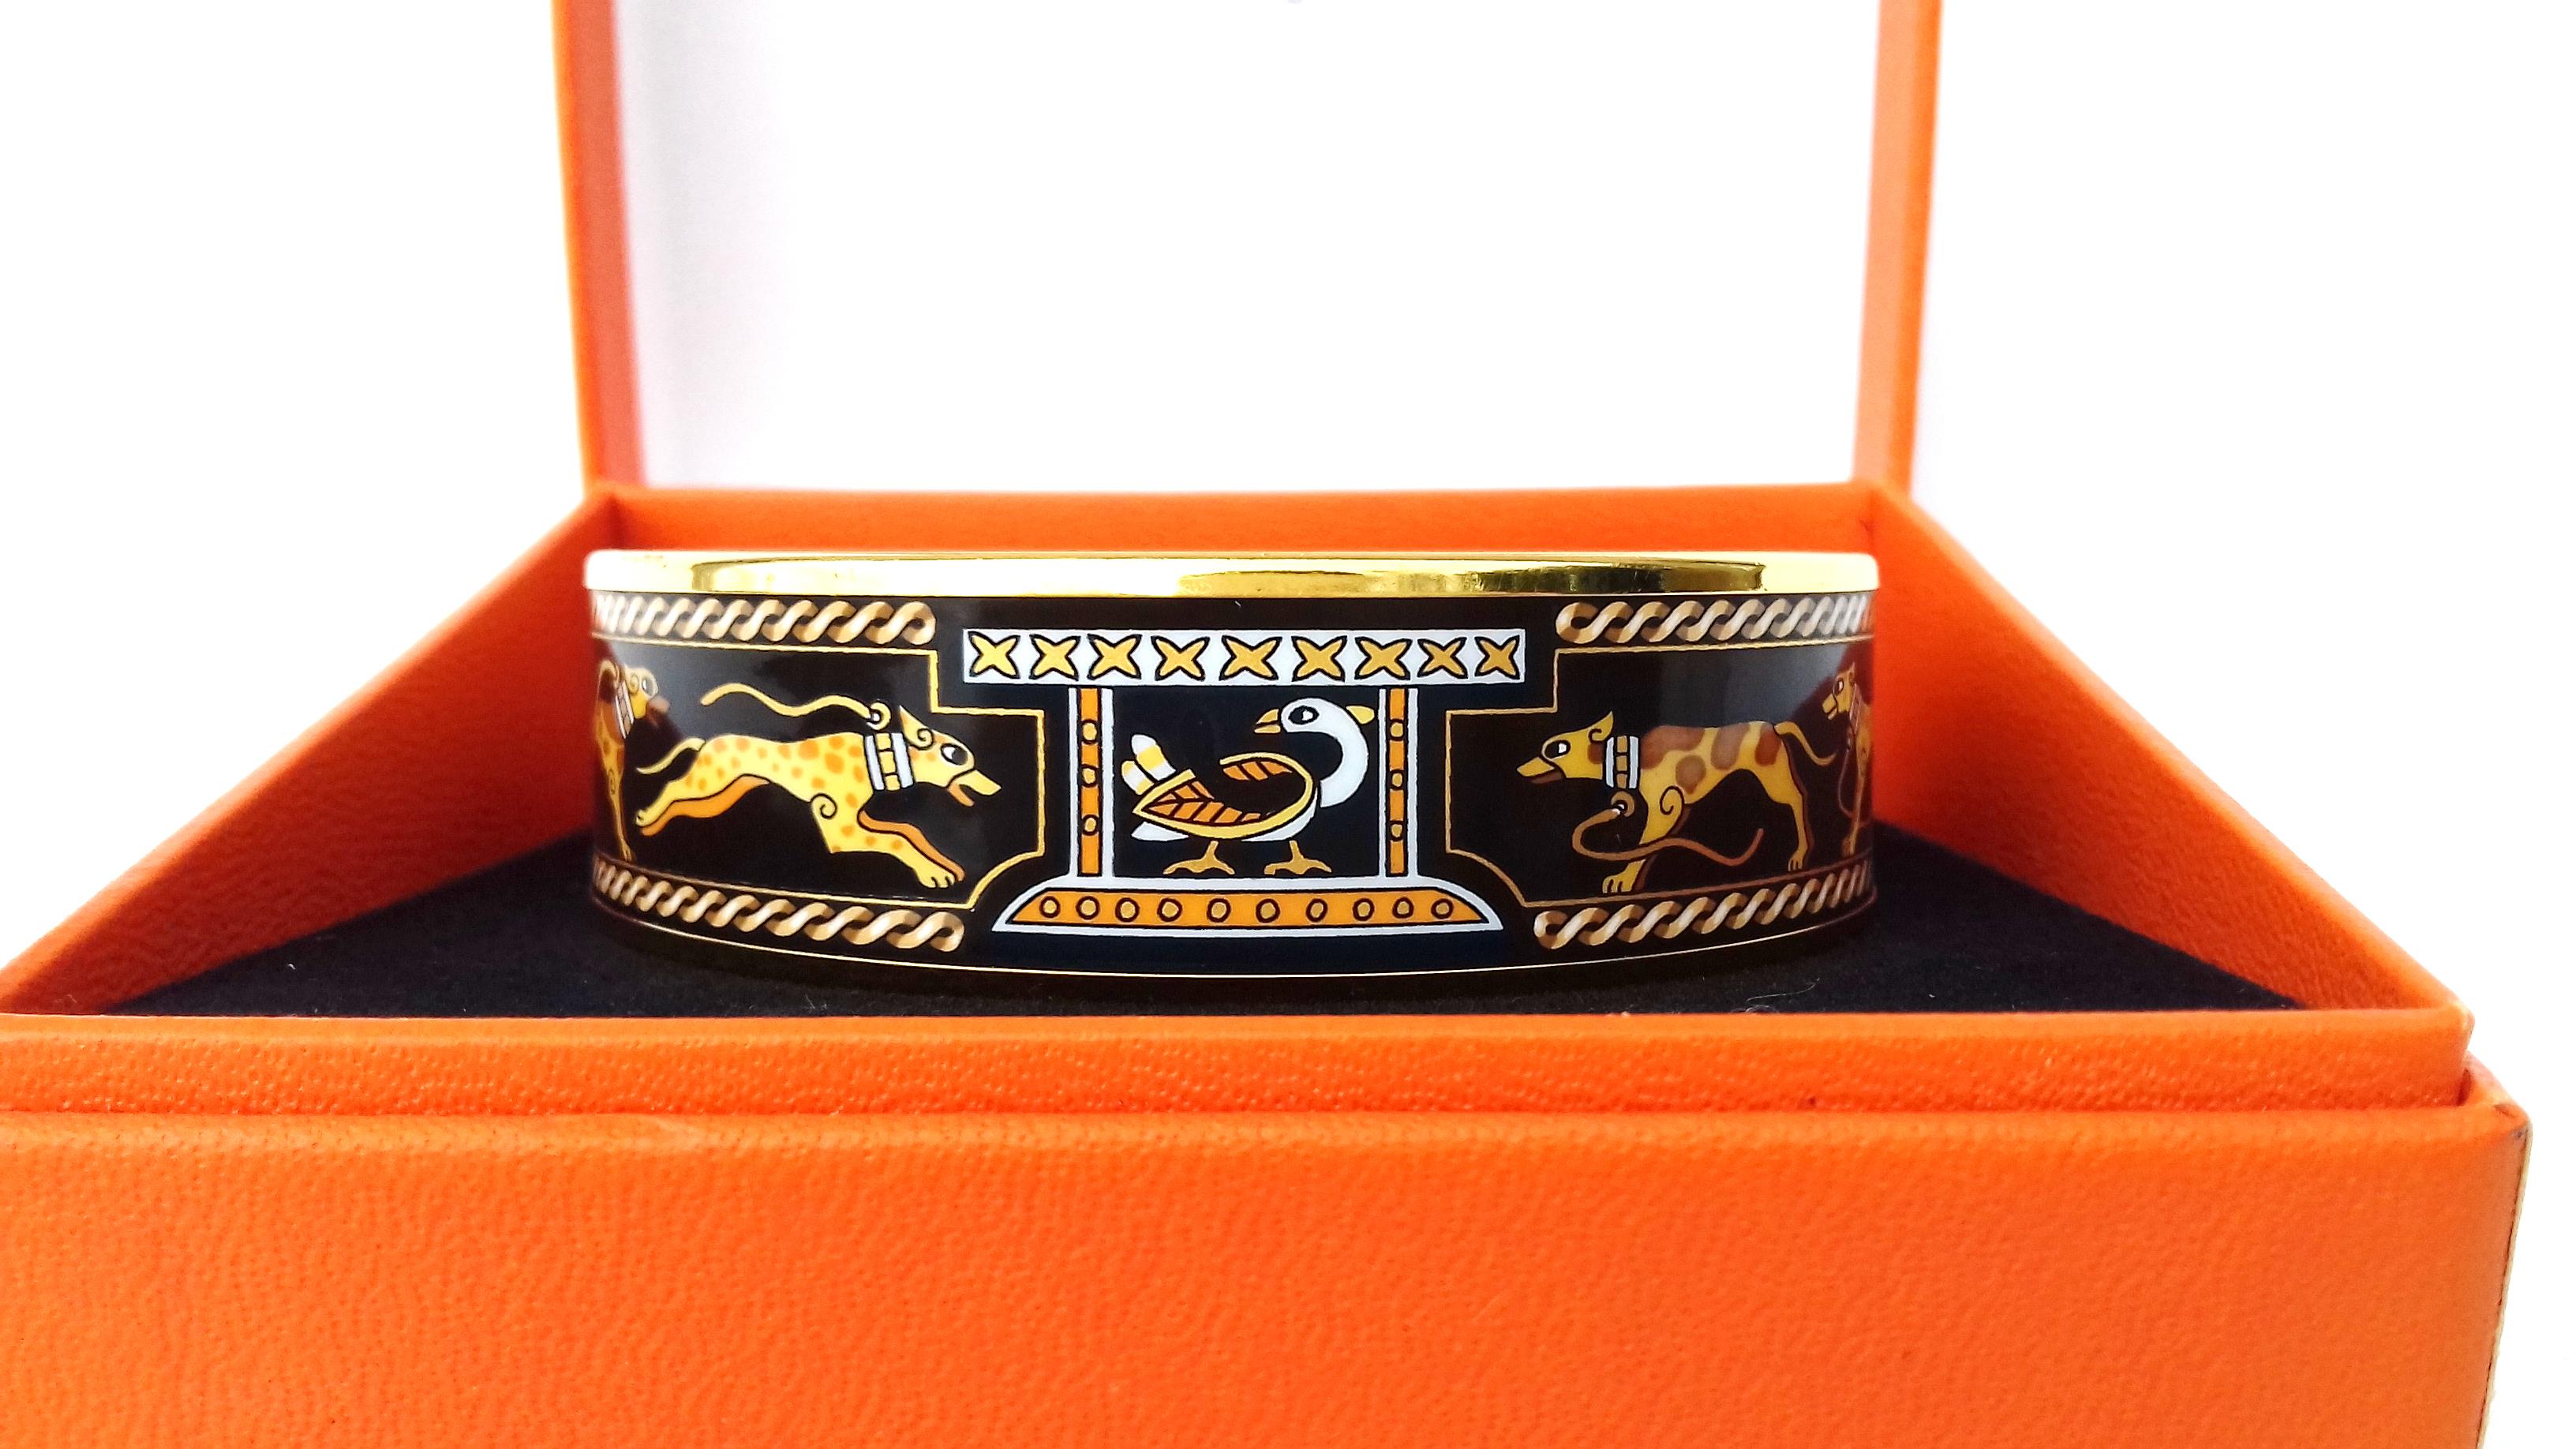 Beautiful Authentic Hermès Bracelet

Pattern: Lévriers (Greyhound dogs)

Hard to find ! 

Made in Austria + B (1998)

Made of Enamel and Gold plated Hardware

Colorways: Black, Yellow, Camel, Brown

The collars, leashes and the interlacing